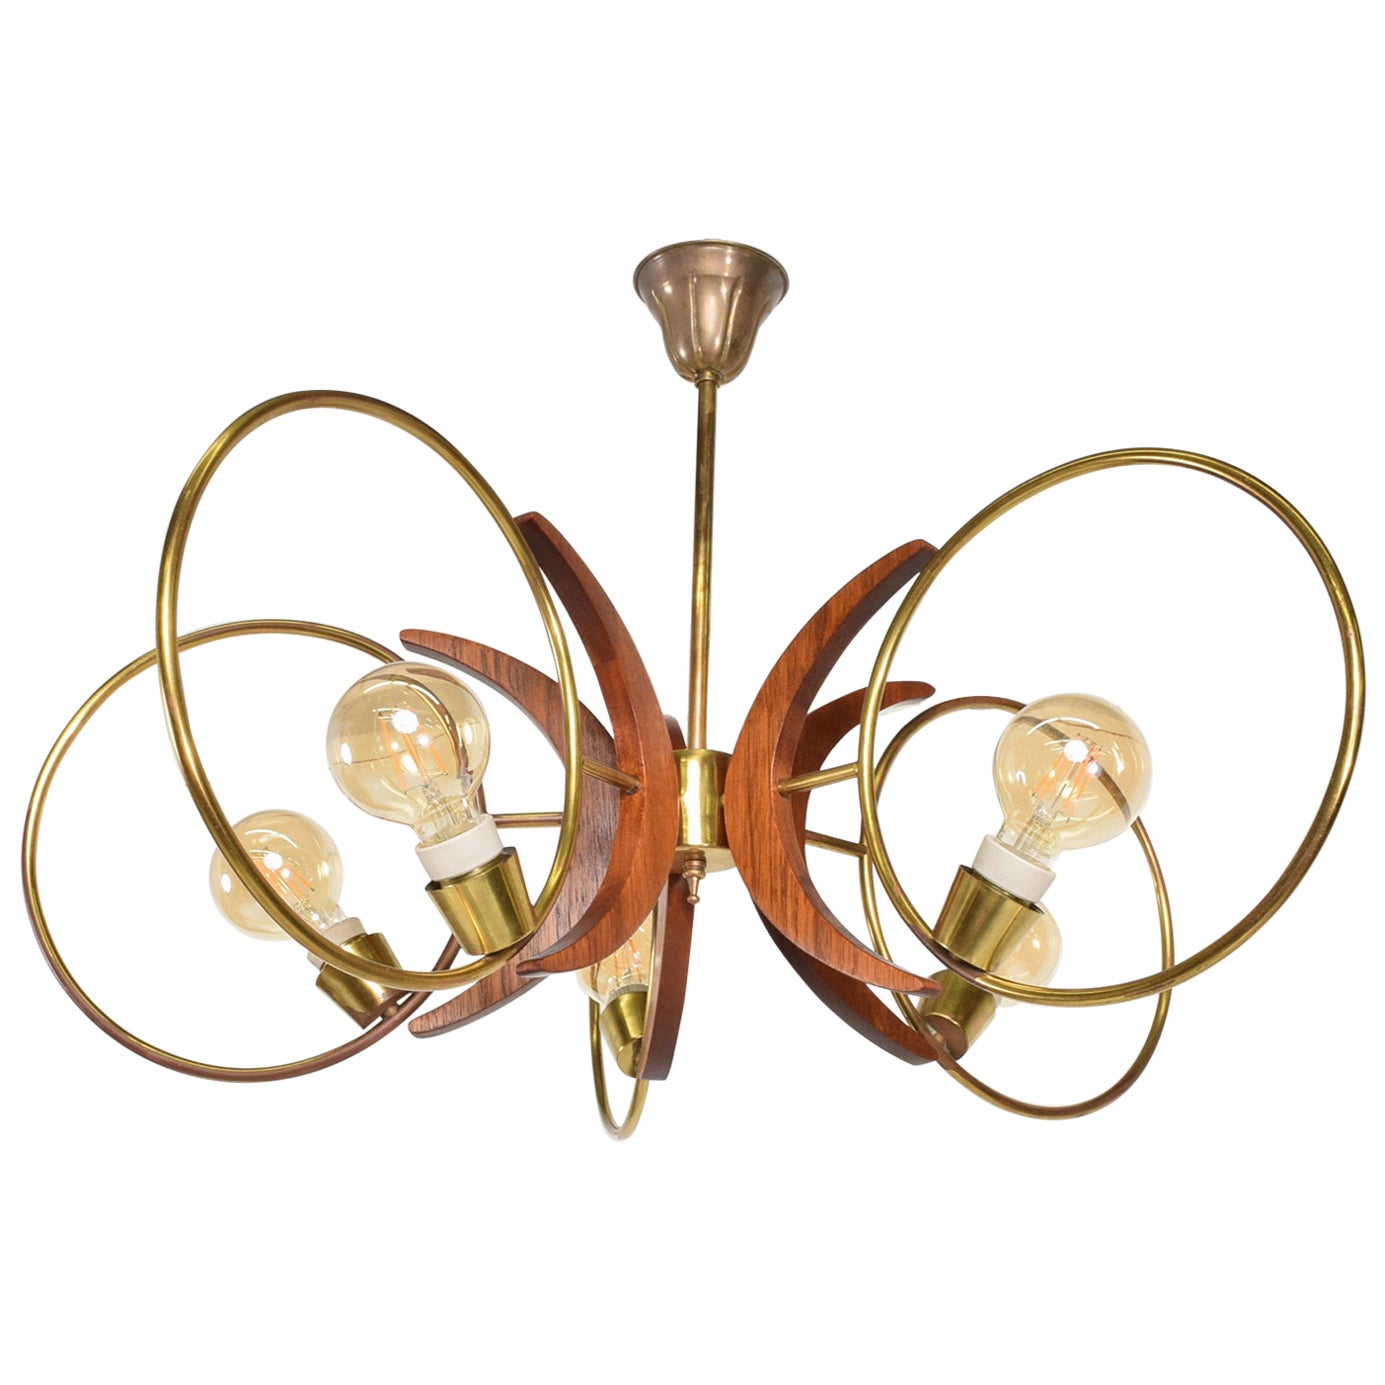 1960s Alluring Five Ring Sculptural Chandelier Brass and Mahogany Mexico City For Sale